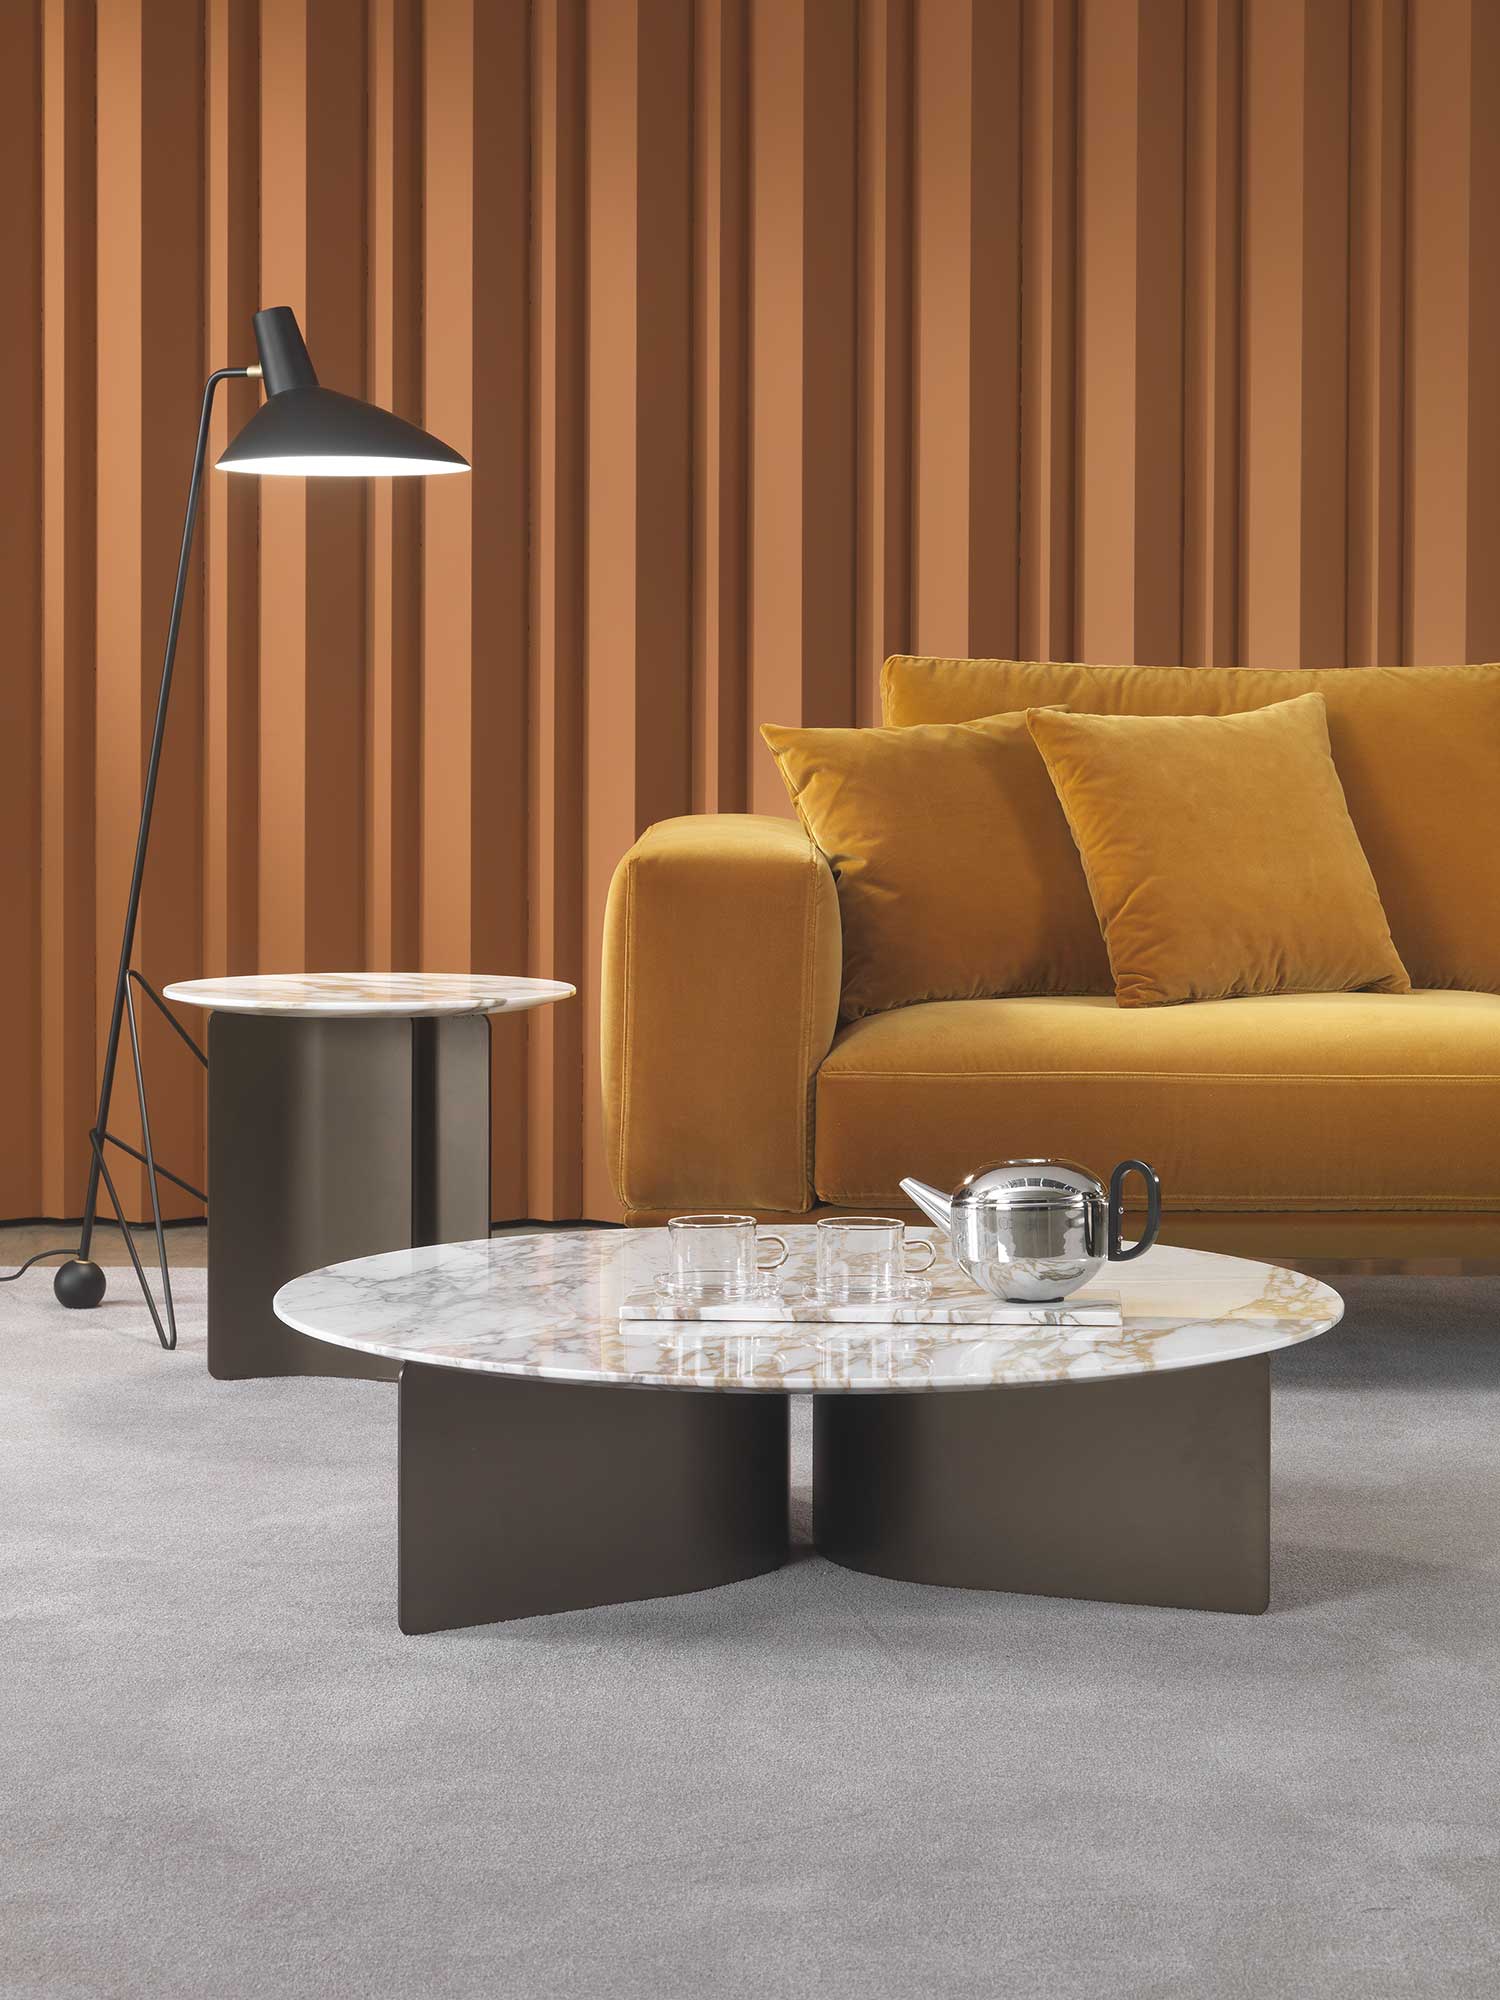 Img044 Wave Coffee Tables D120x27 OPM18 OPP7